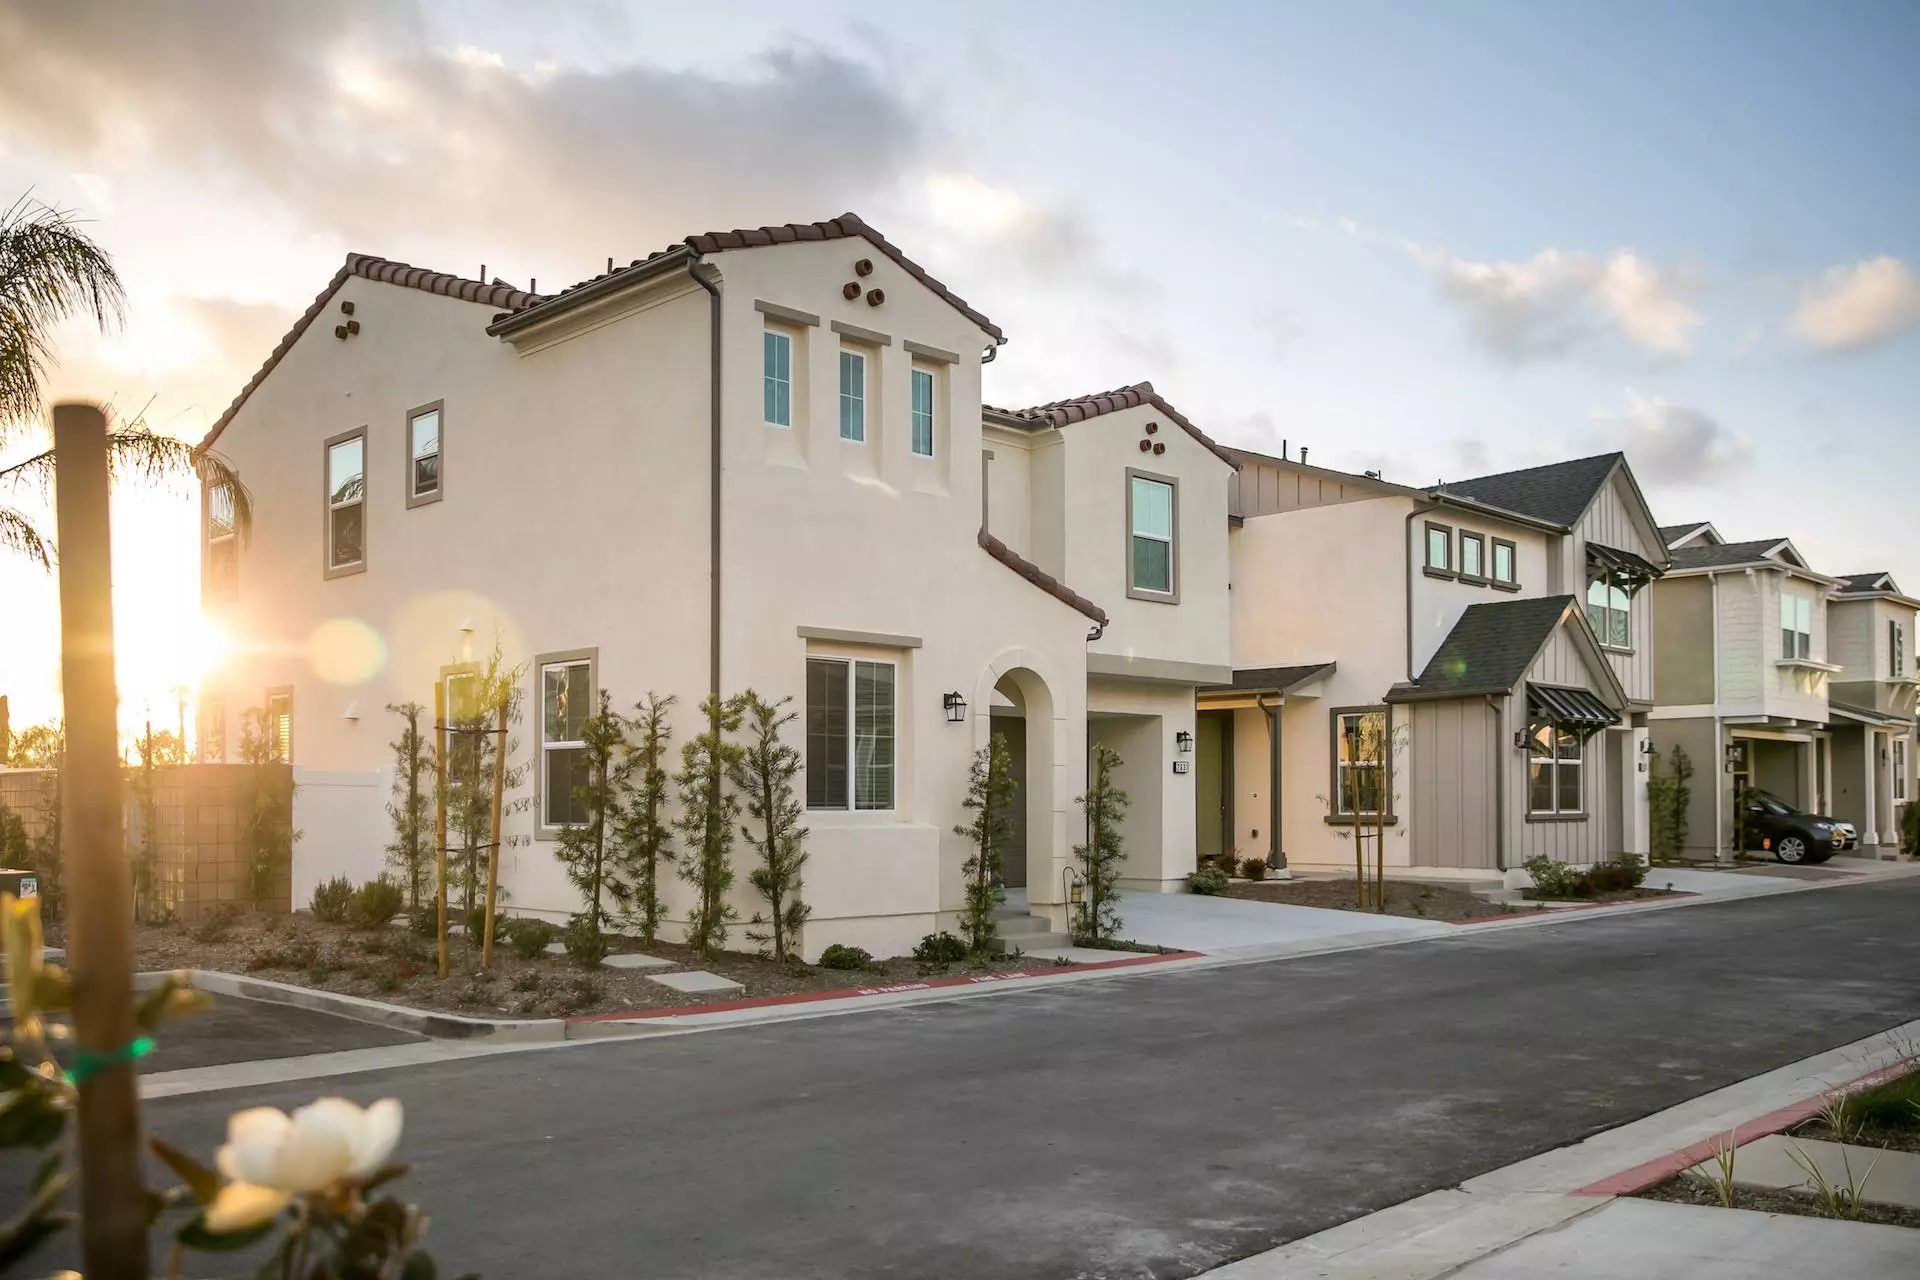 The median home price in Costa Mesa is around $1 million